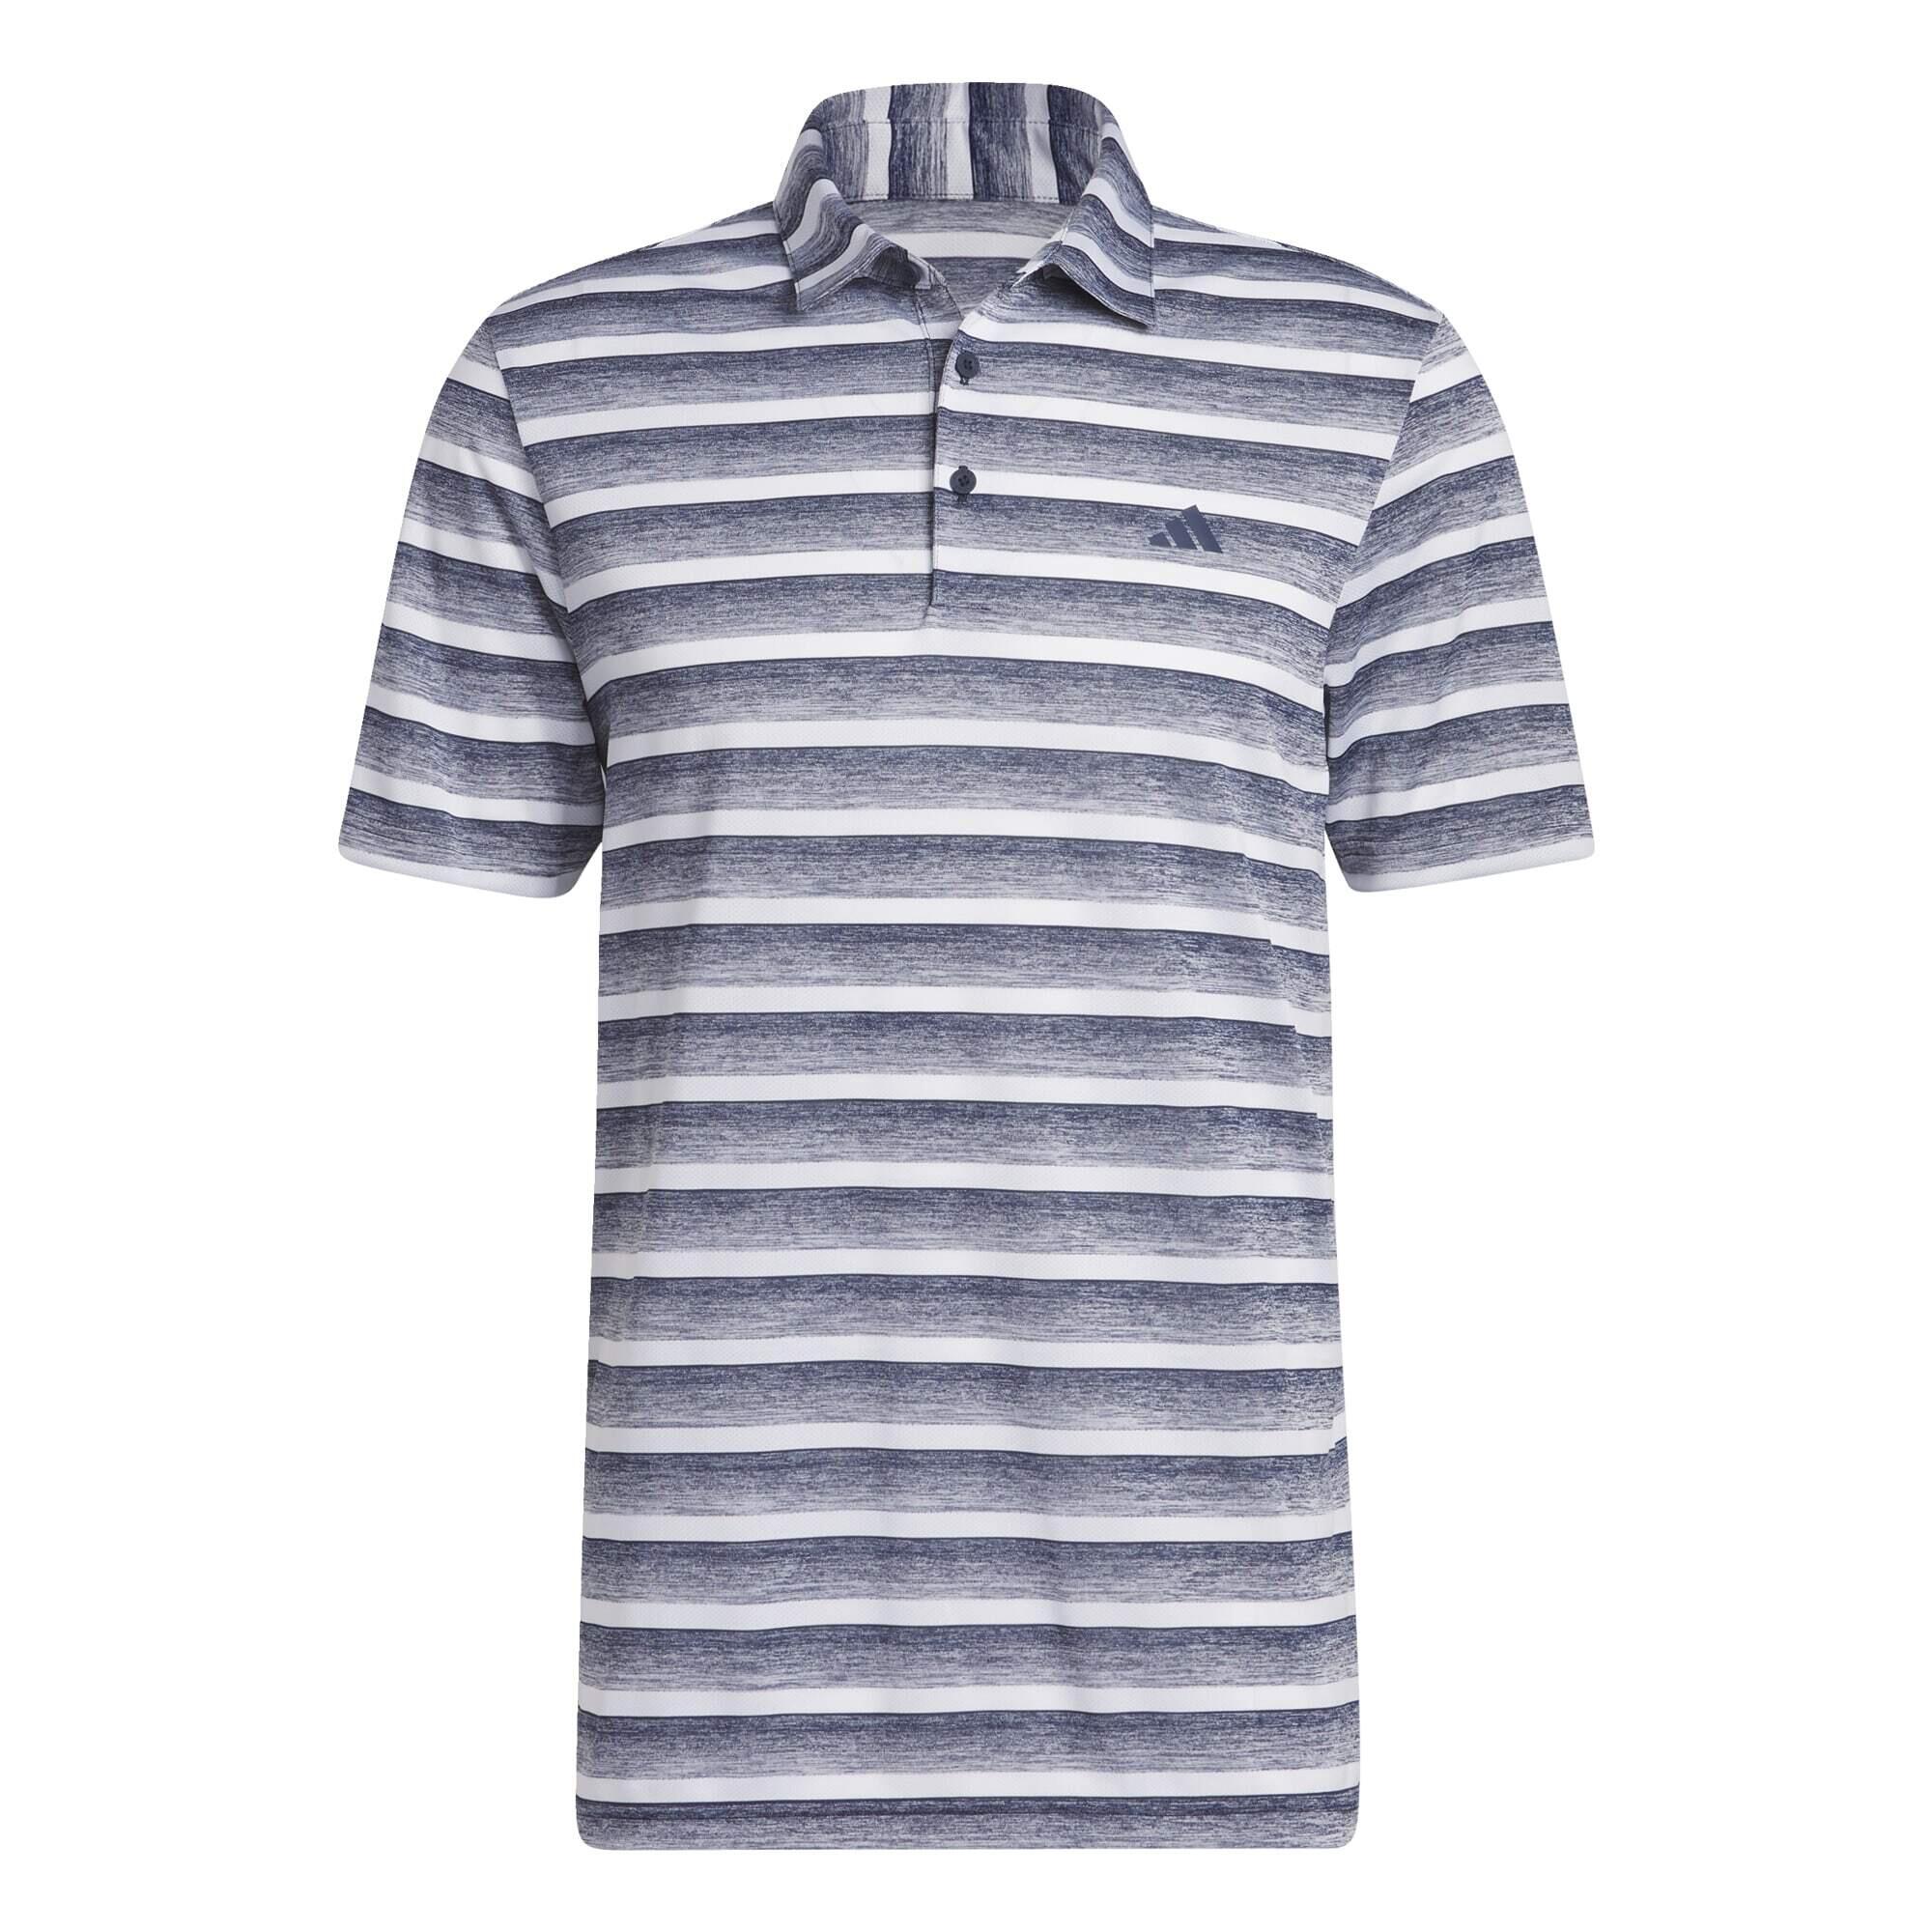 Two-Color Striped Golf Polo Shirt 2/5